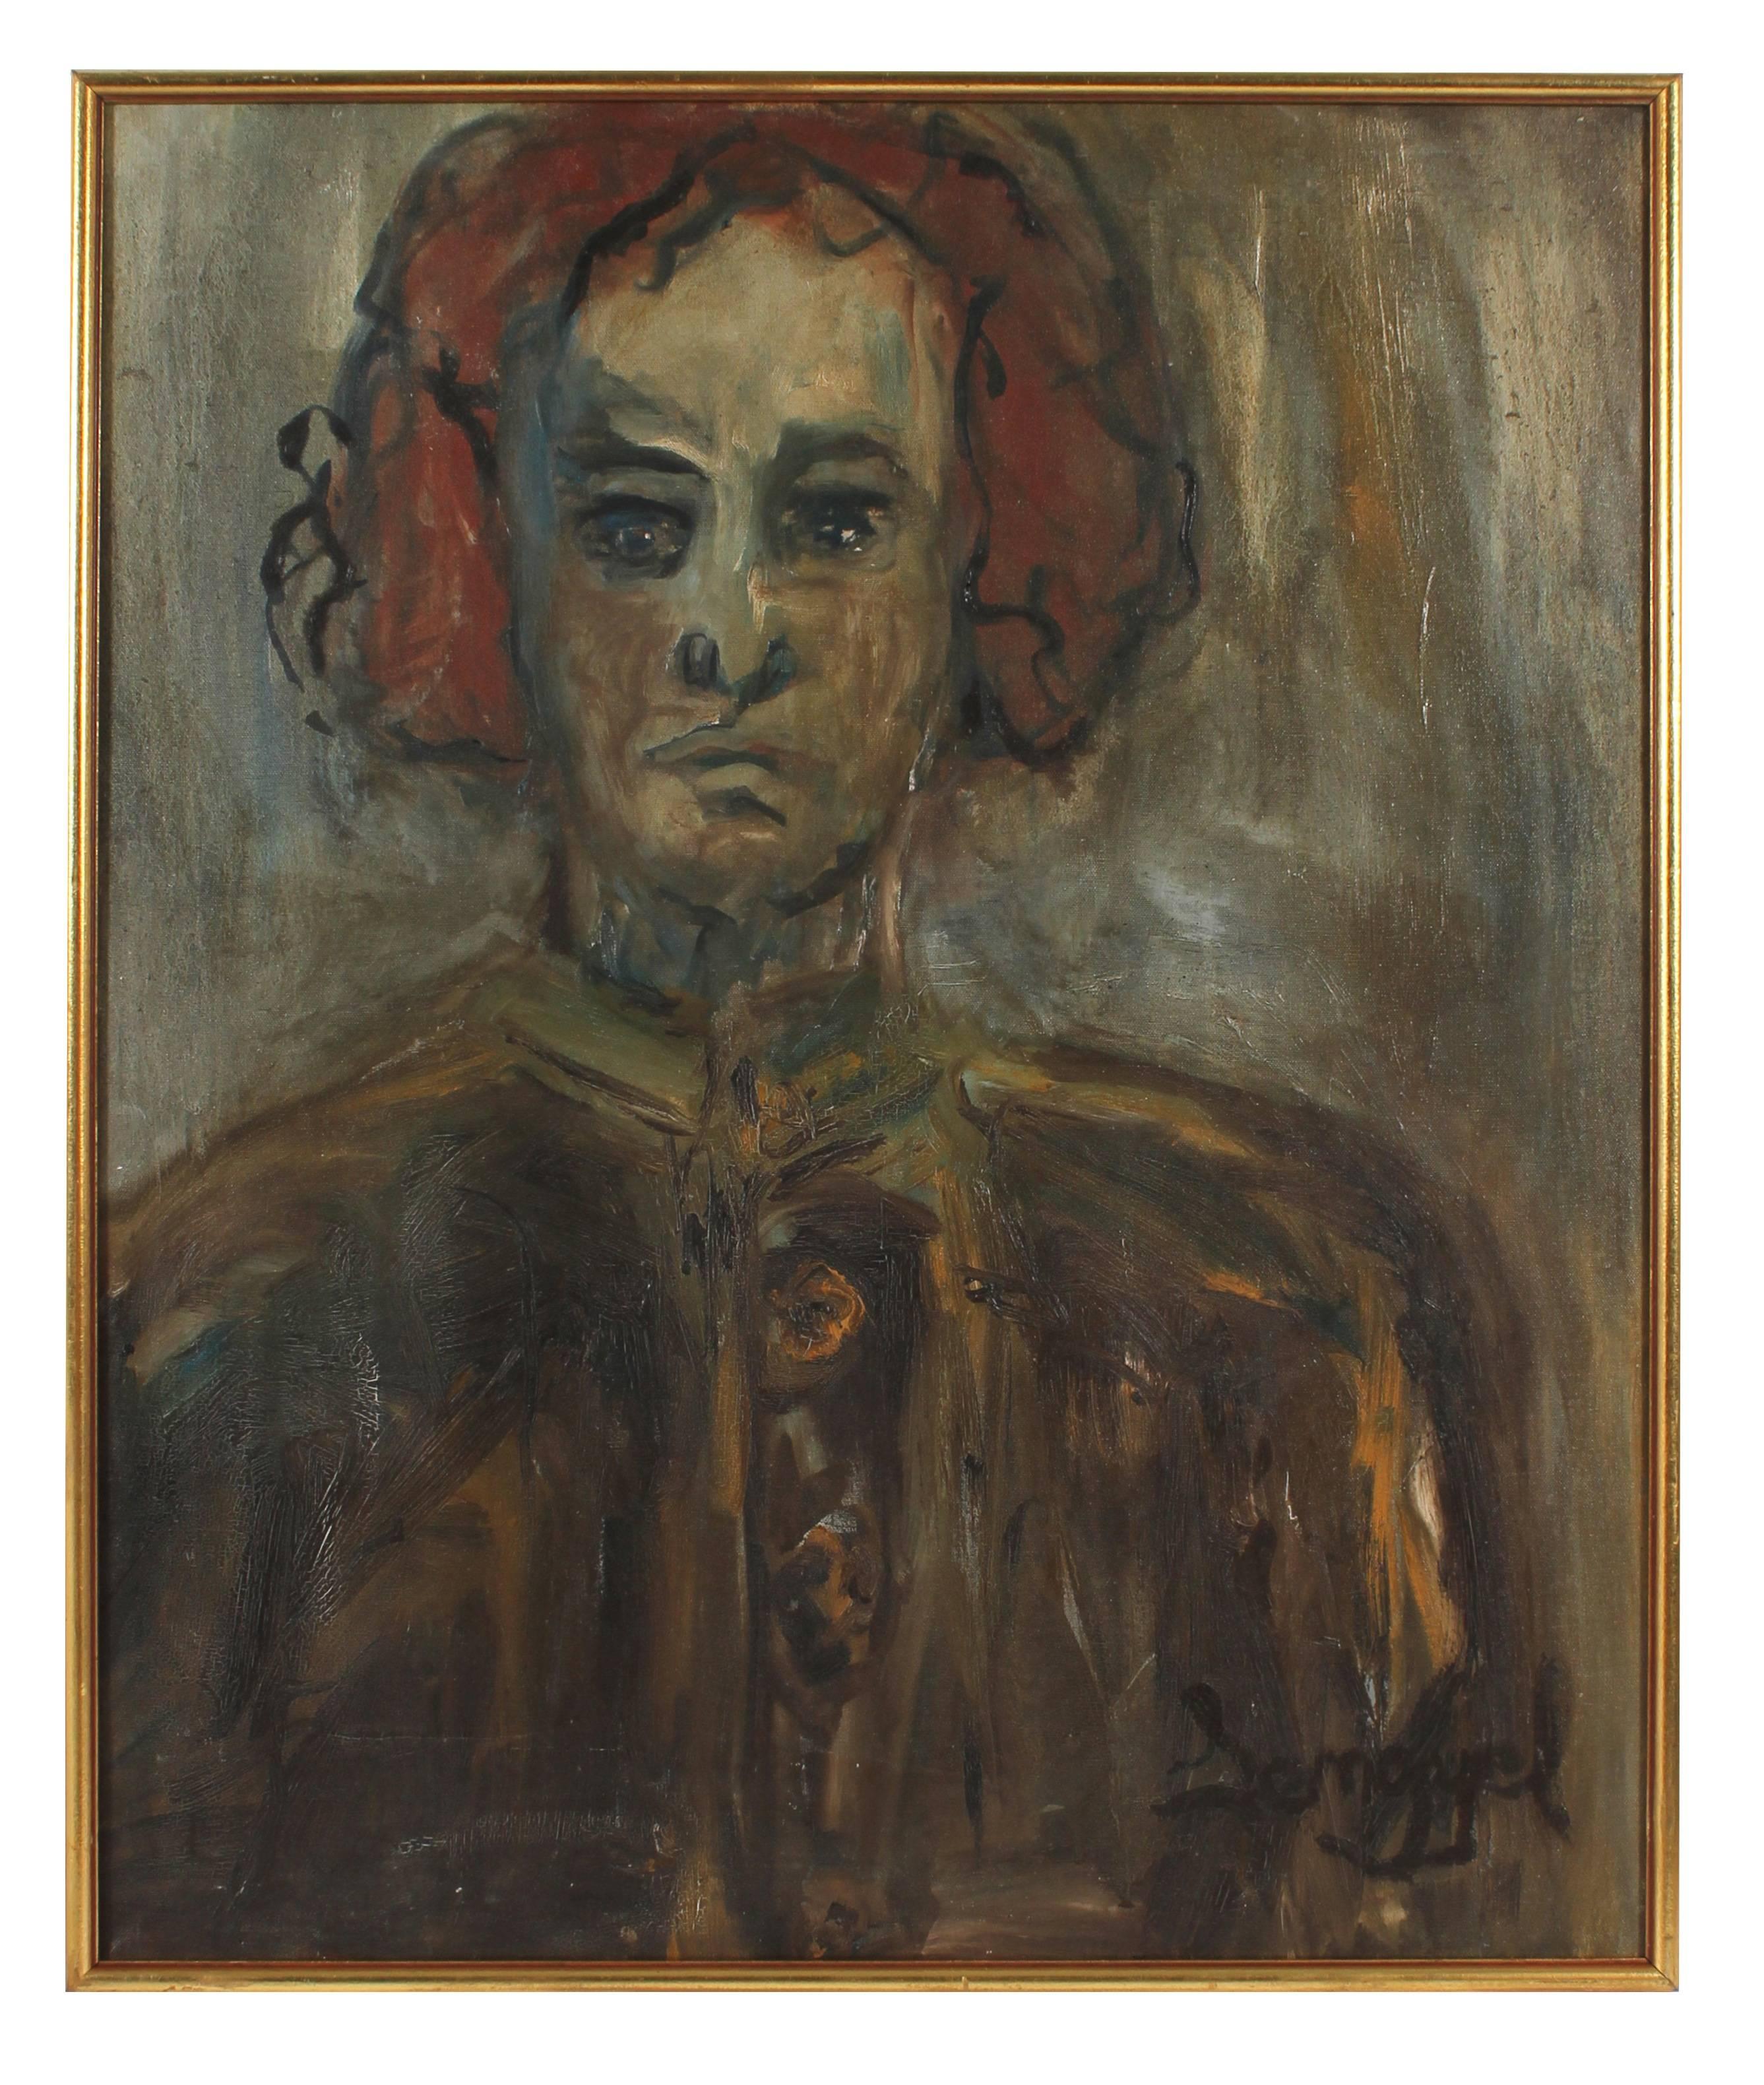 "Kathleen Brown, The Painter, Oakland" Portrait in Gray Brown & Rust Red, 1967